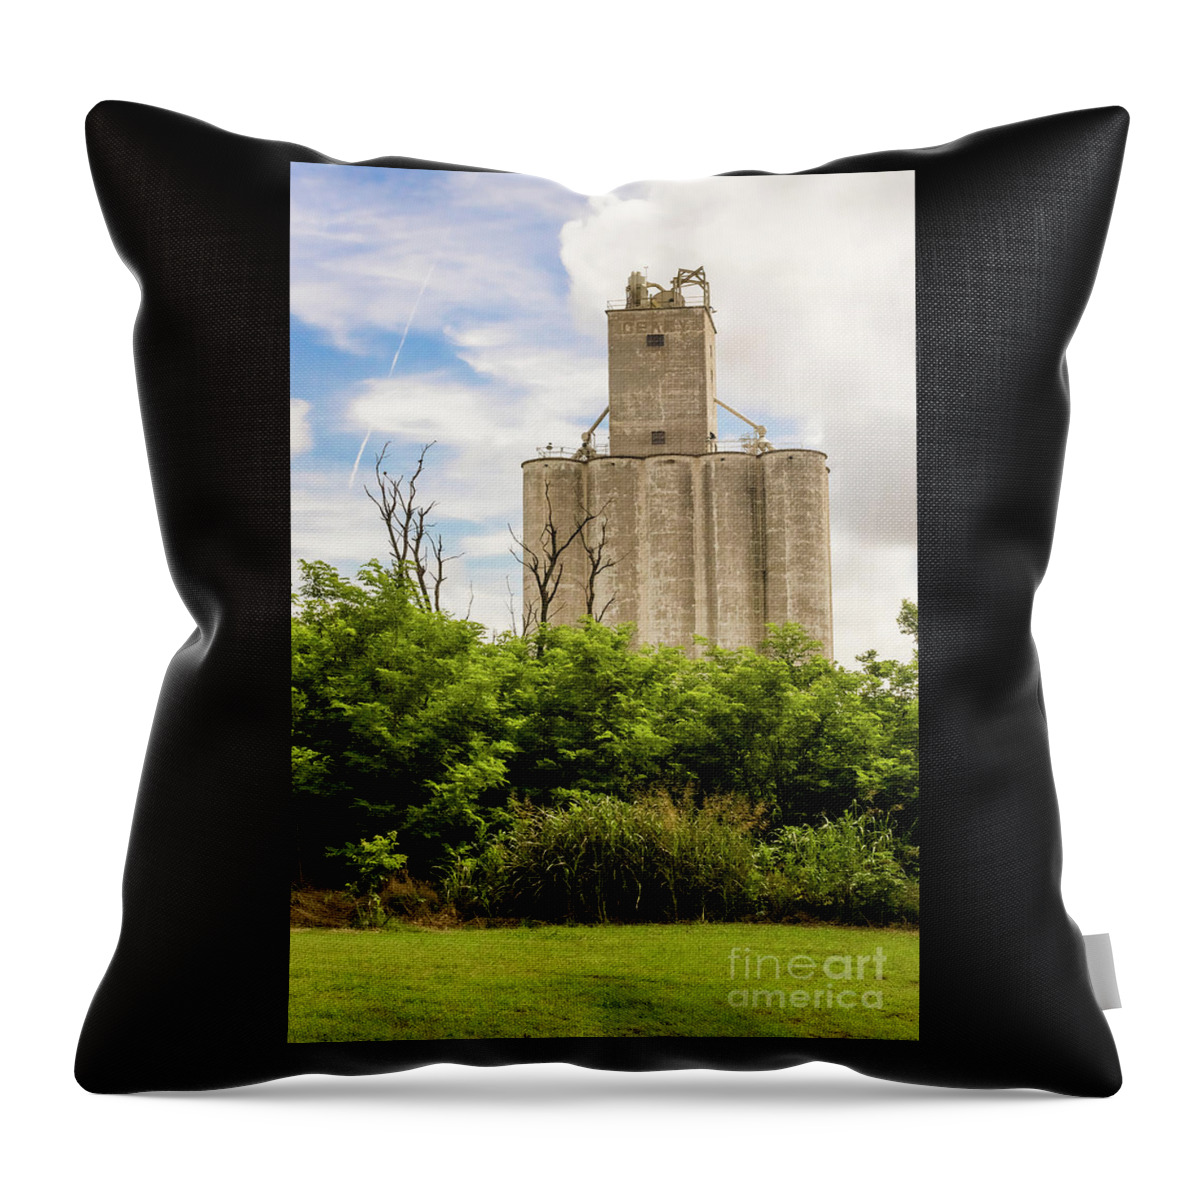 Geary Grain Elevator Throw Pillow featuring the photograph Geary Grain Elevator by Imagery by Charly